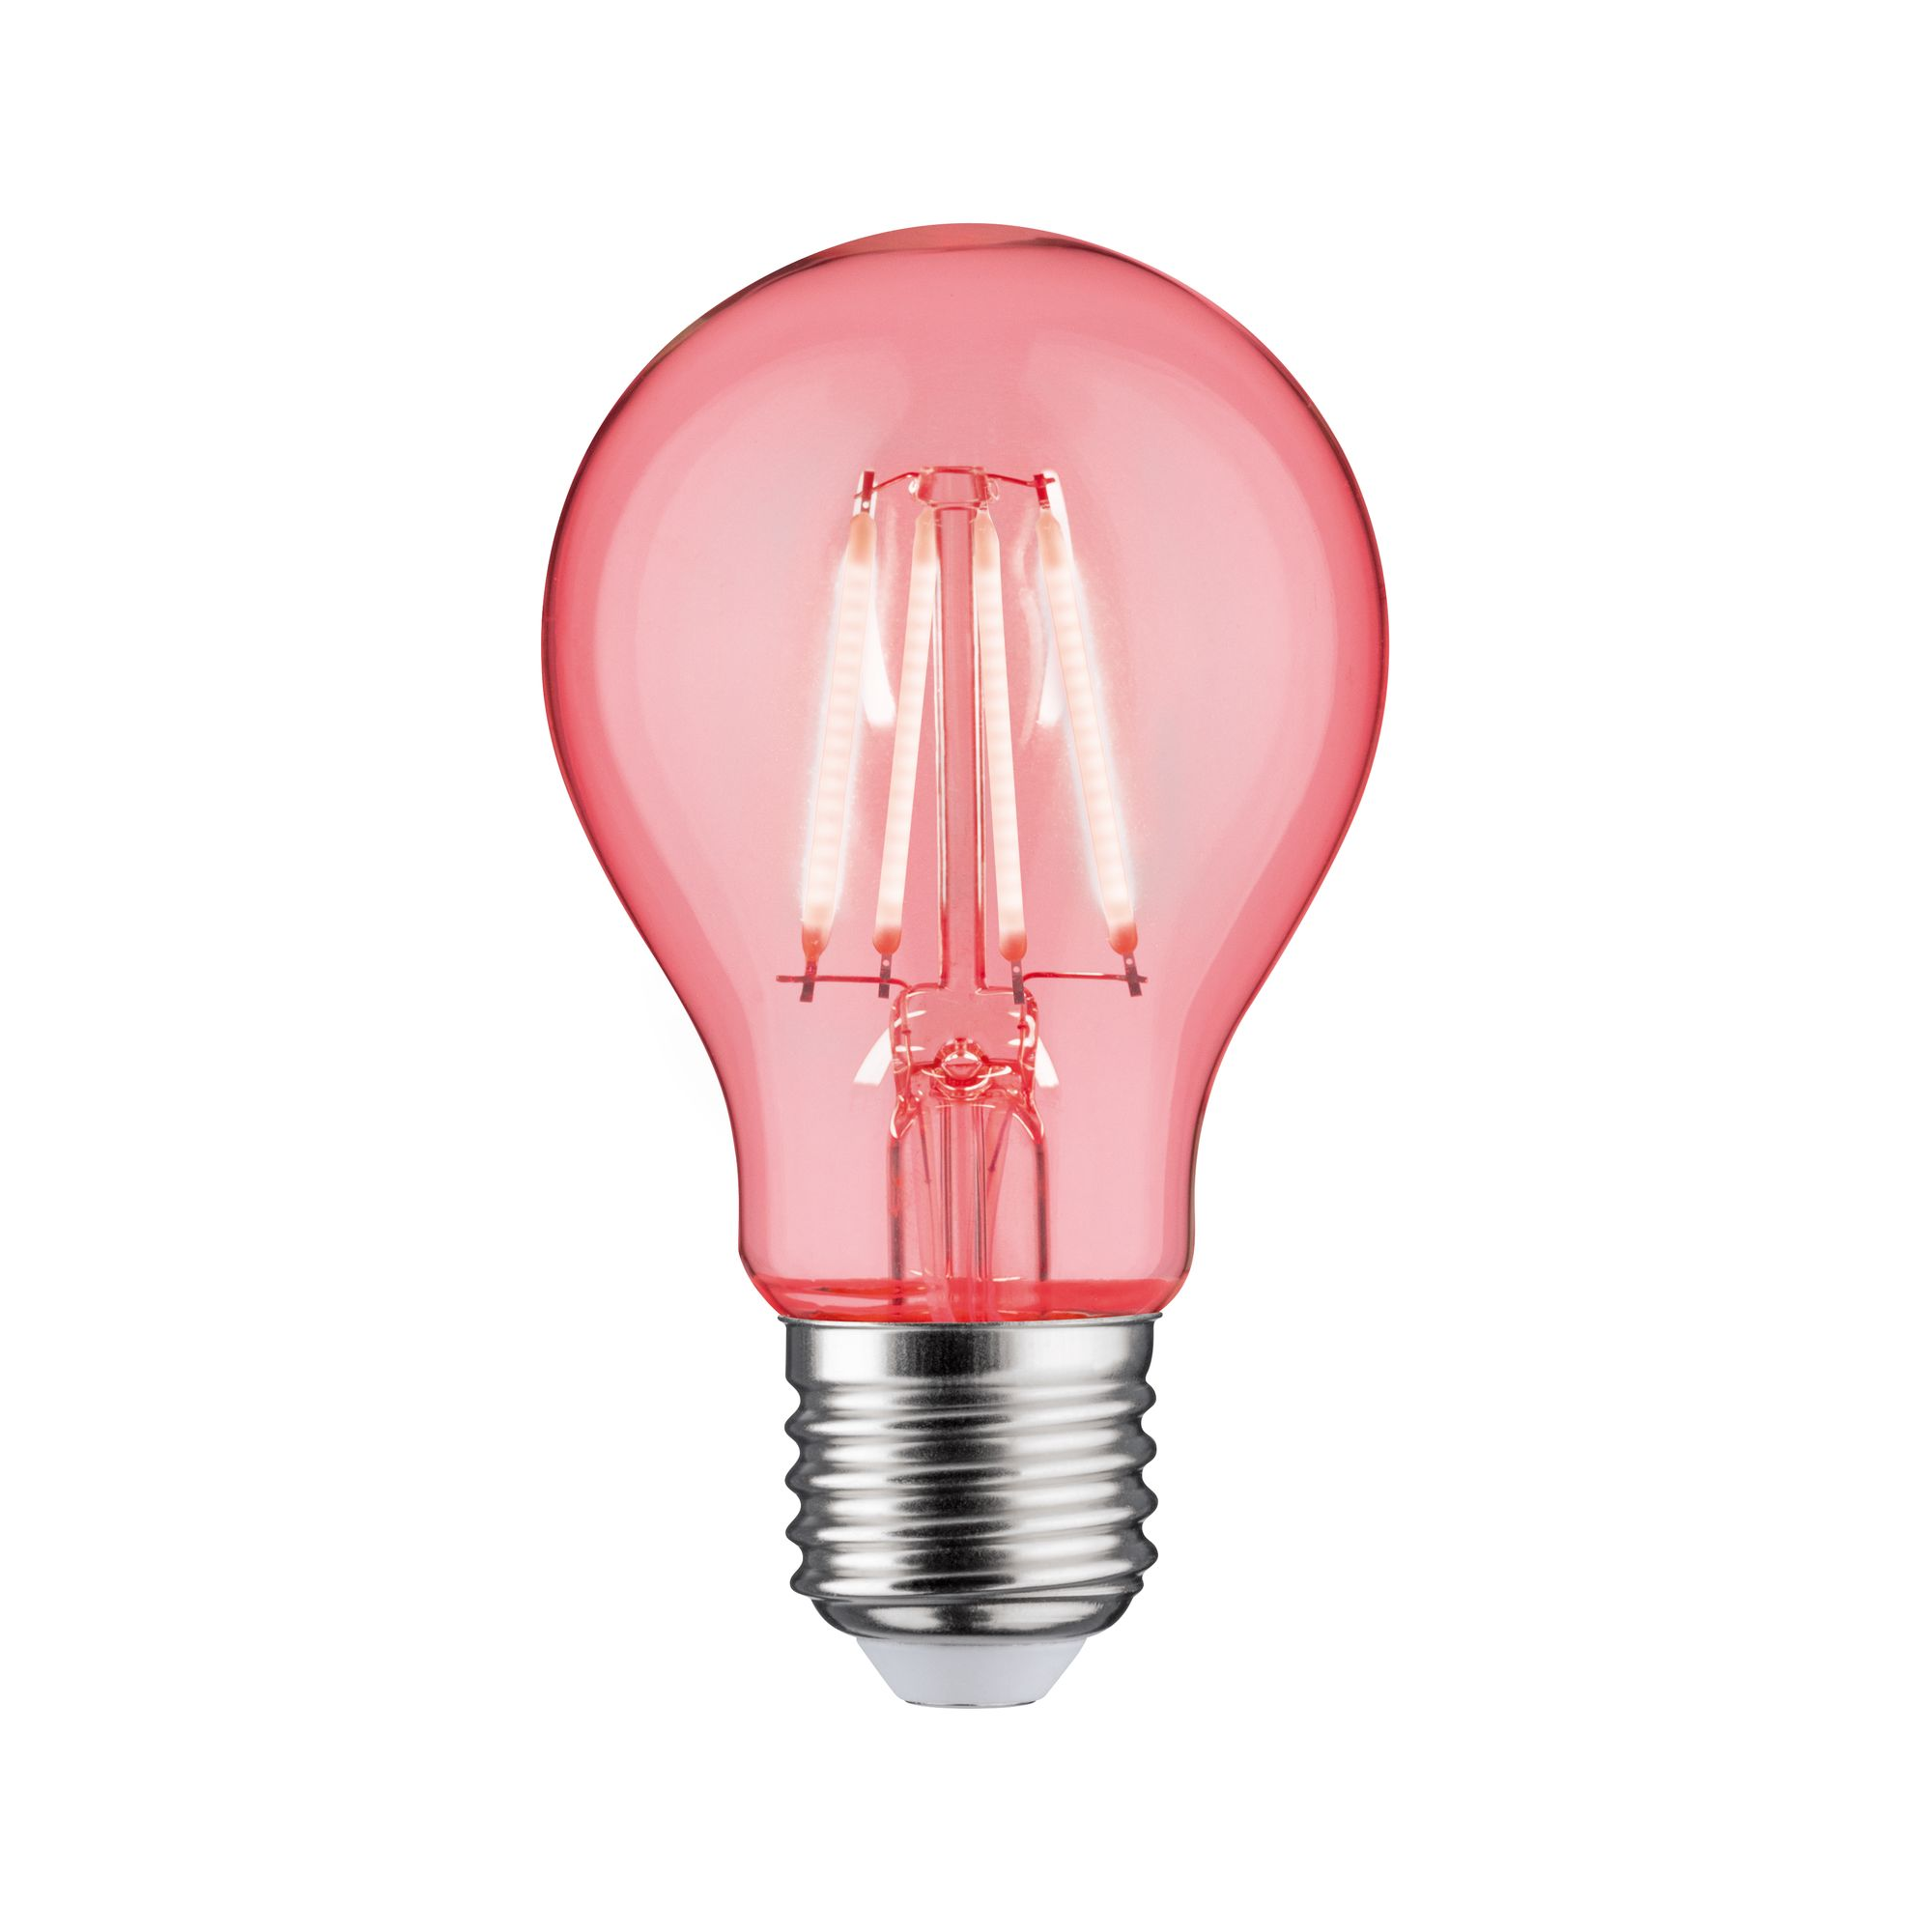 LED-Lampe E27 1,3W 40 lm rot klar + product picture